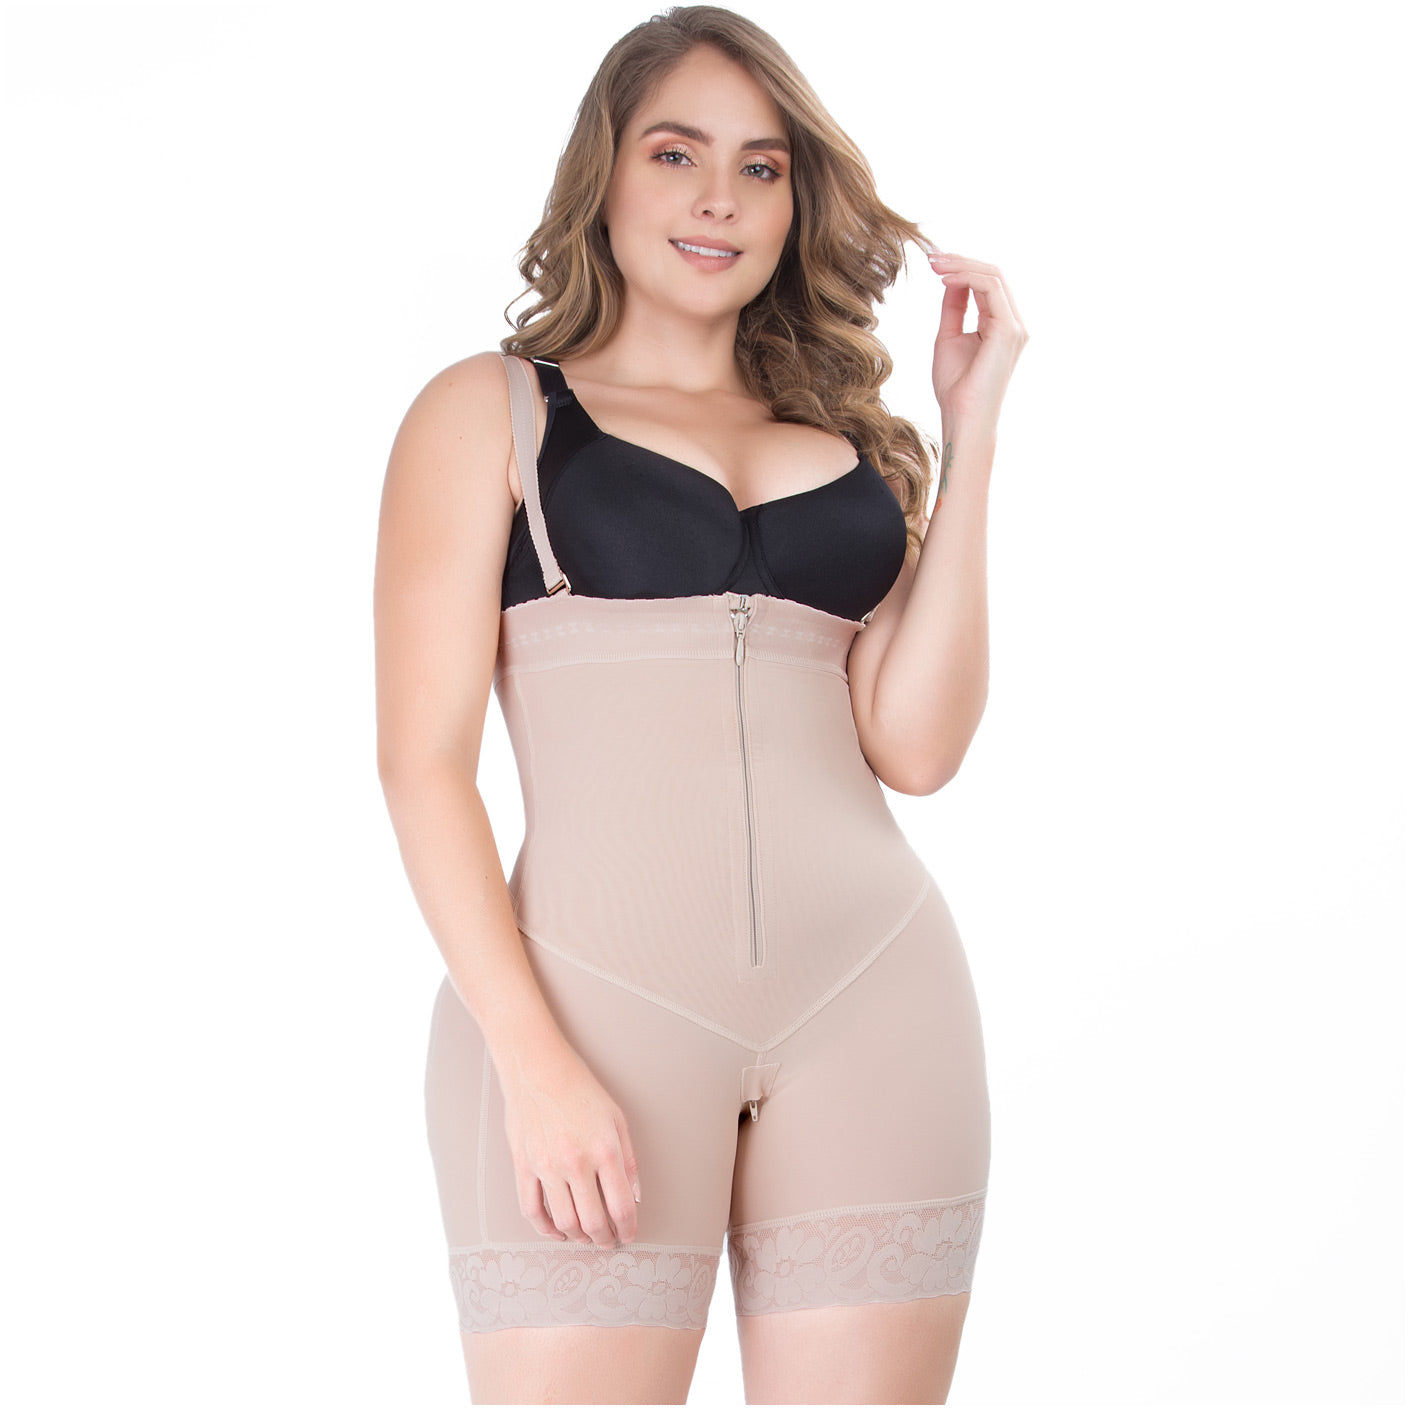 Siluet Hourglass Shapewear with rods